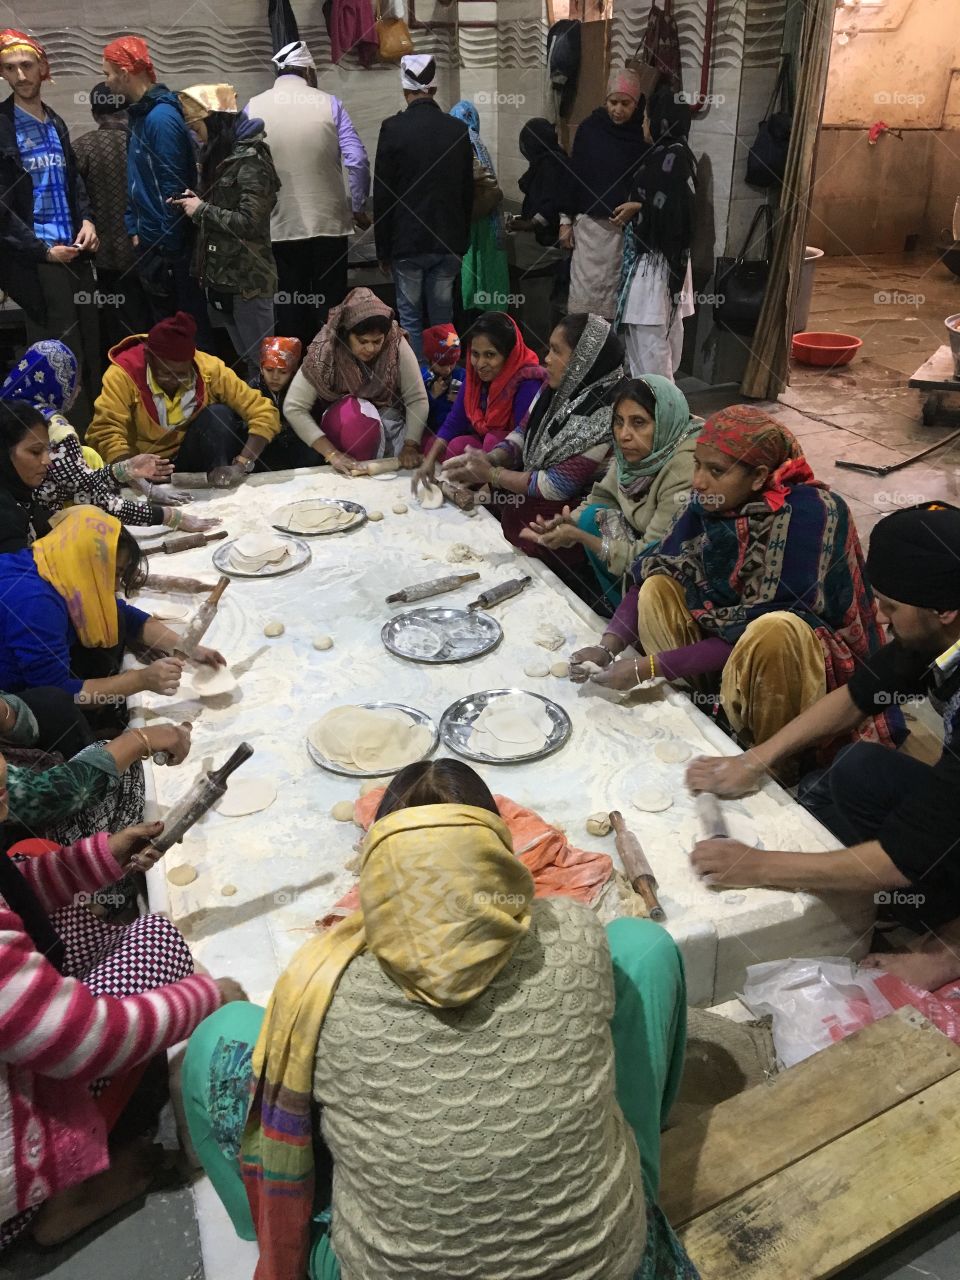 Making chapati to feed the needy at a Sikh temple in Old Delhi, India.